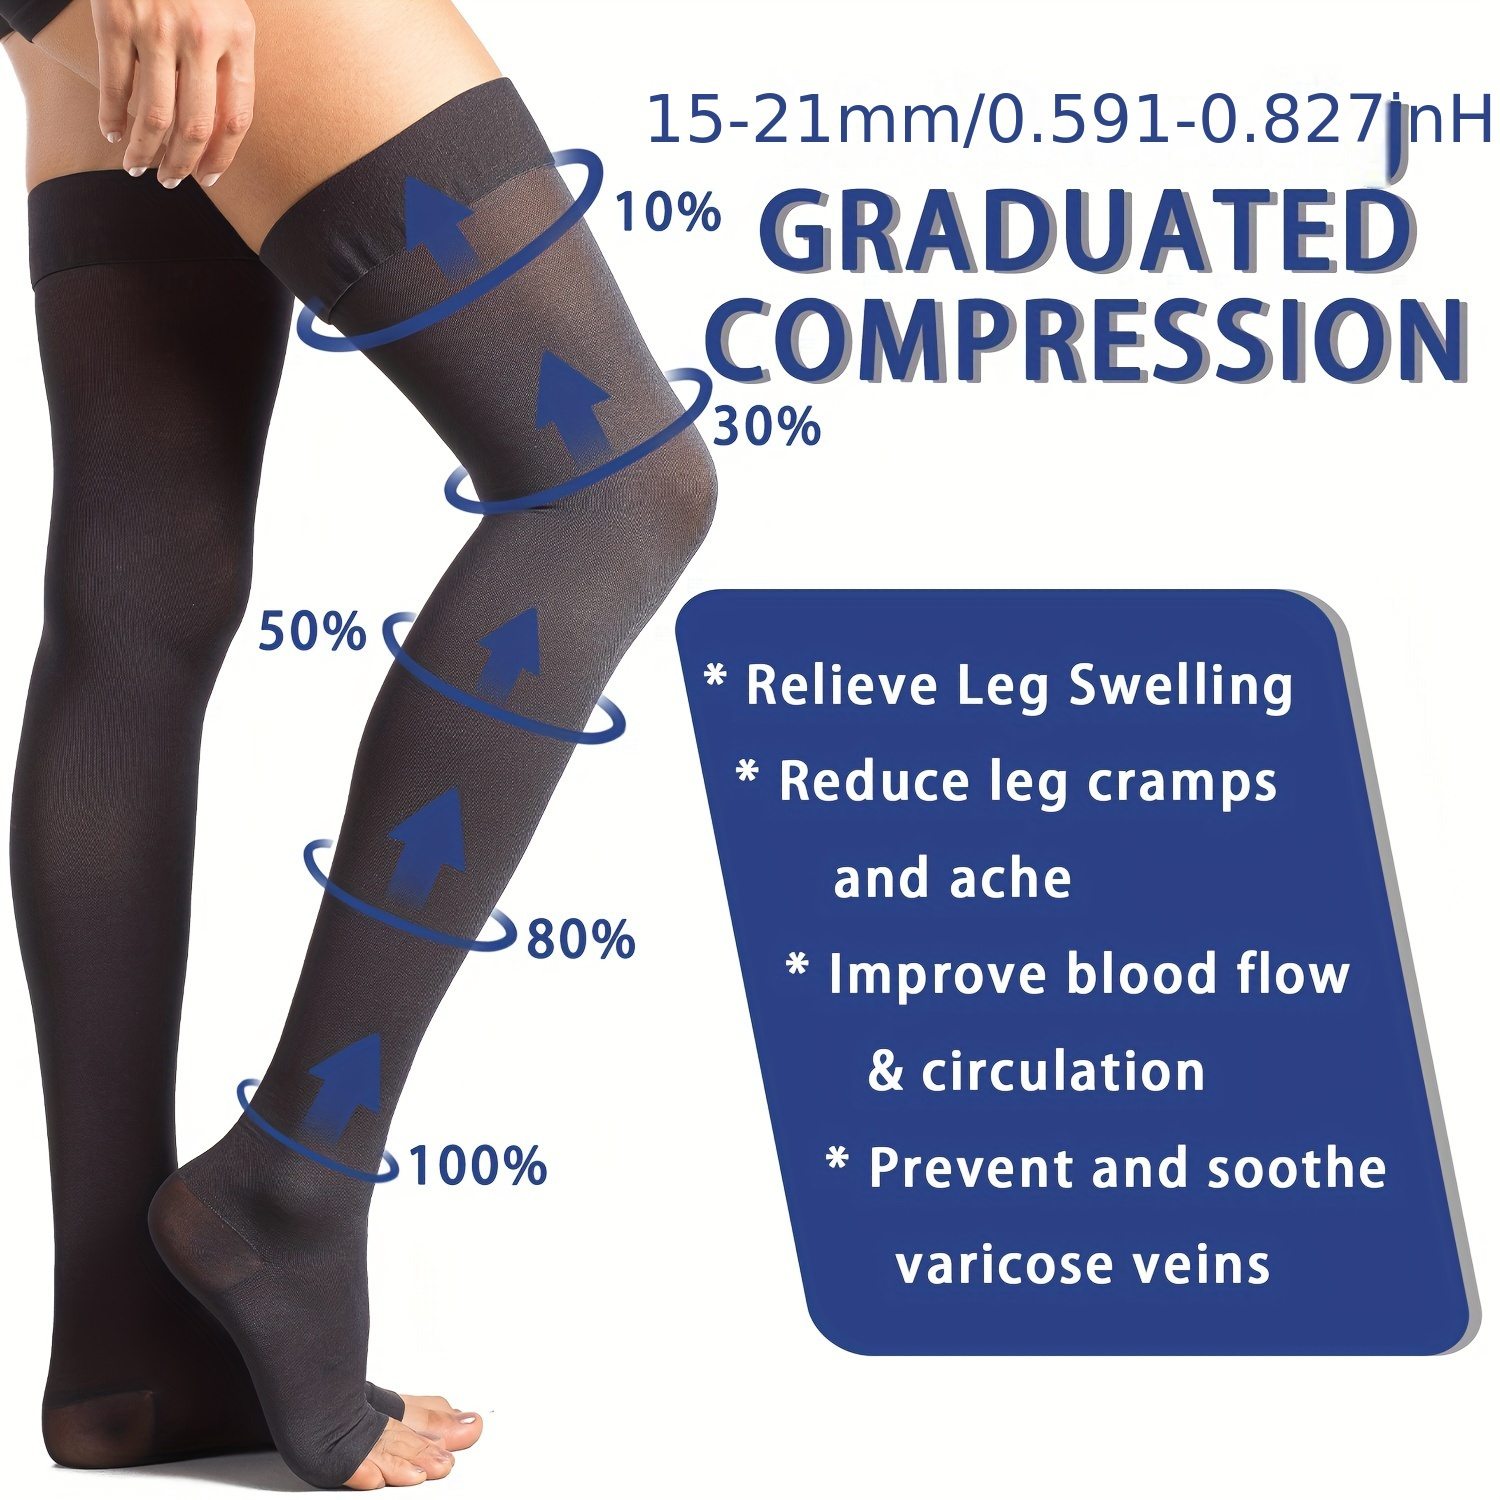 High Graduated Compression Stockings